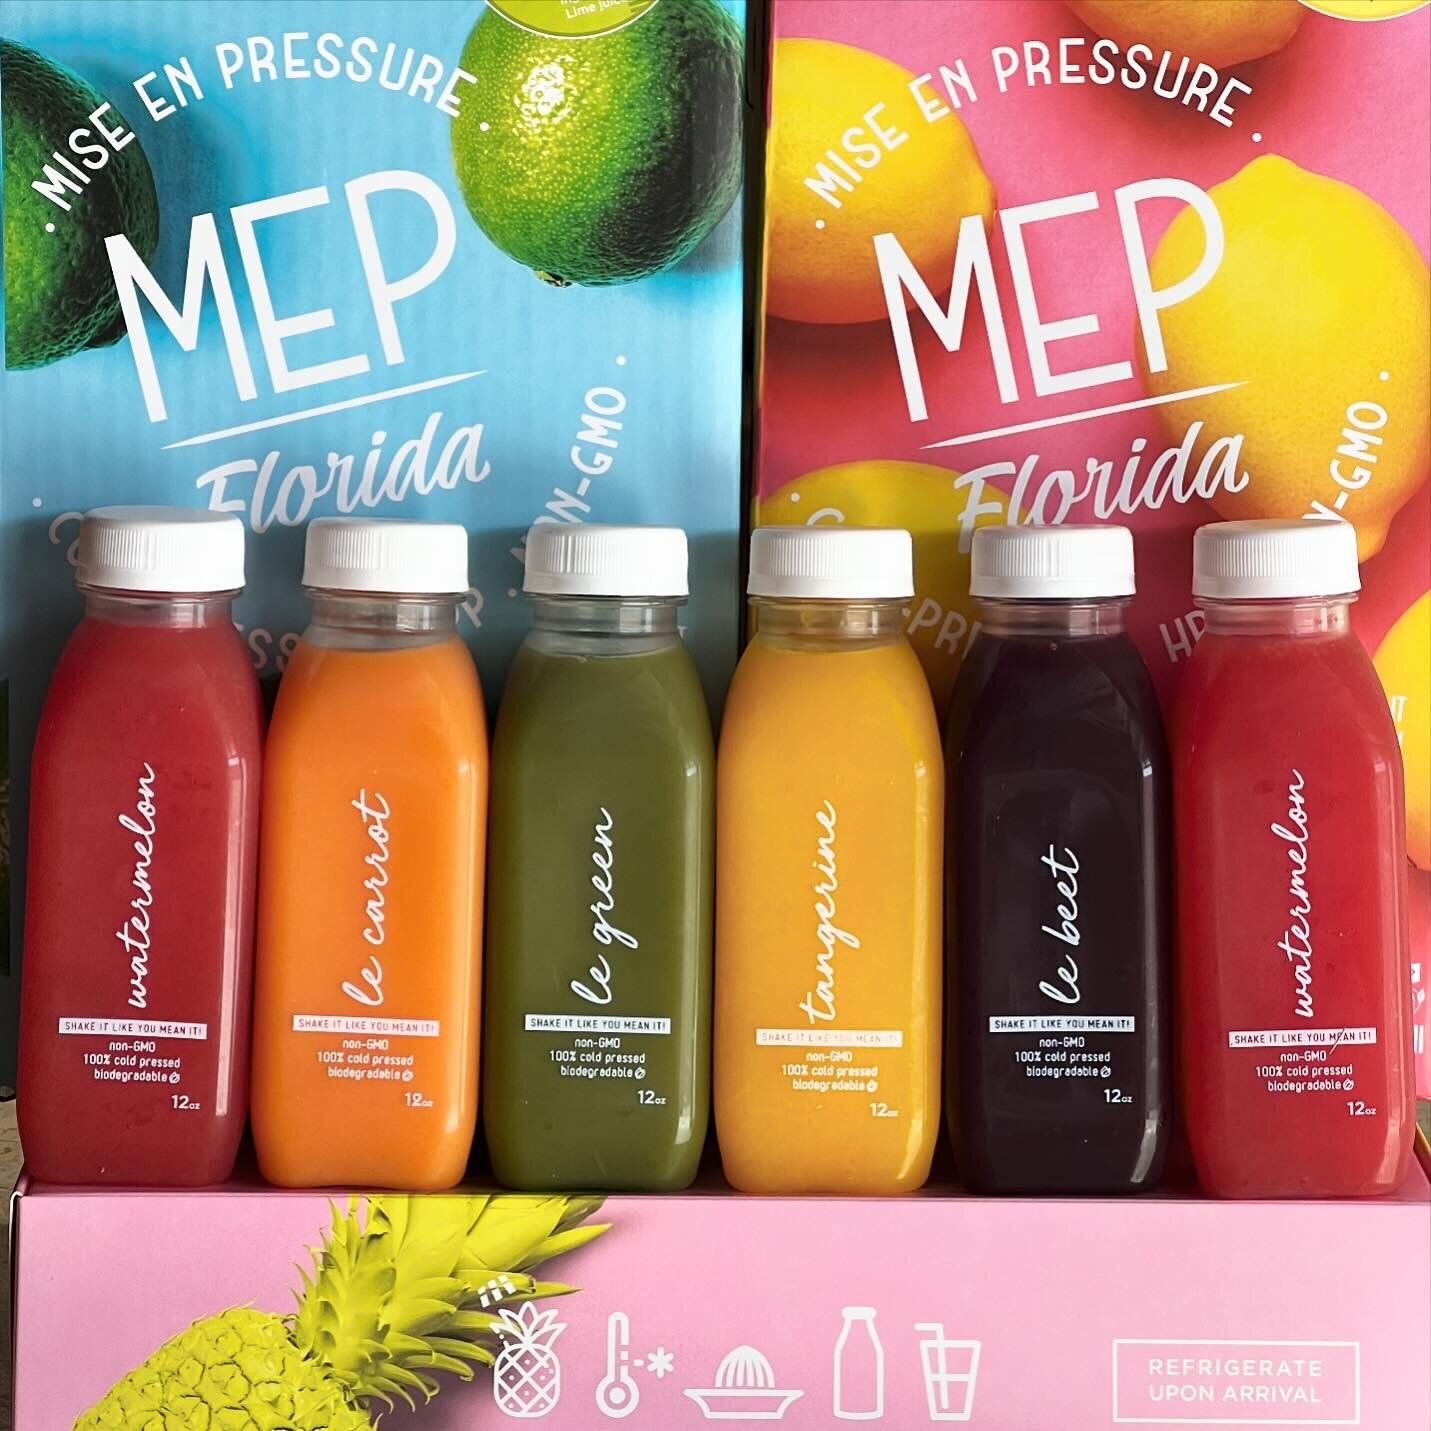 Our juices are not only visually stunning but also bursting with delicious flavors! We source the finest fruits and vegetables, ensuring that each sip is packed with the authentic taste of nature&rsquo;s bounty. Enjoy

#coldpressed #freshjuice #local